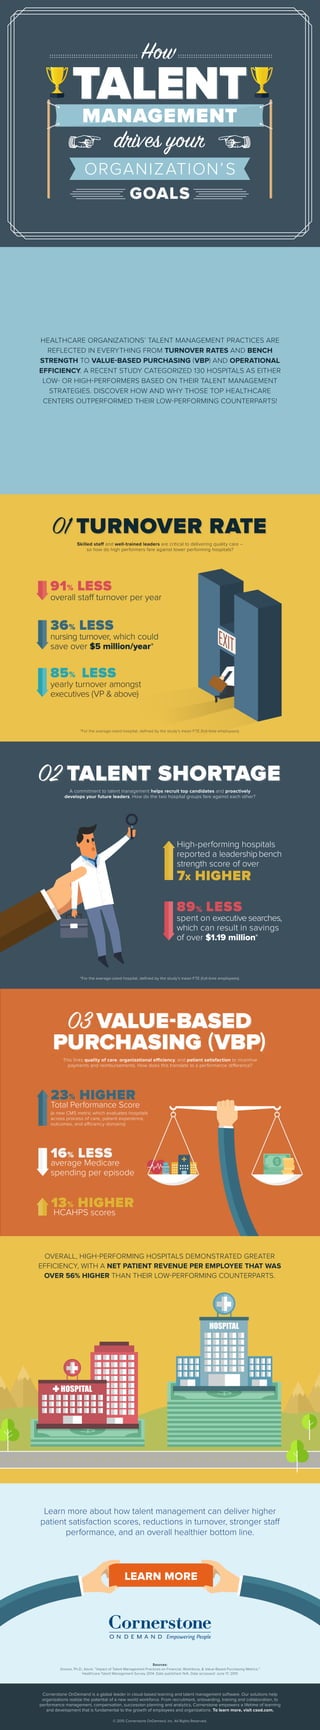 LEARN MORE
*For the average-sized hospital, deﬁned by the study’s mean FTE (full-time employees).
TALENT
How
TALENTMANAGEMENT
drives your
ORGANIZATION’S
GOALS
HEALTHCARE ORGANIZATIONS’ TALENT MANAGEMENT PRACTICES ARE
REFLECTED IN EVERYTHING FROM TURNOVER RATES AND BENCH
STRENGTH TO VALUE-BASED PURCHASING (VBP) AND OPERATIONAL
EFFICIENCY. A RECENT STUDY CATEGORIZED 130 HOSPITALS AS EITHER
LOW- OR HIGH-PERFORMERS BASED ON THEIR TALENT MANAGEMENT
STRATEGIES. DISCOVER HOW AND WHY THOSE TOP HEALTHCARE
CENTERS OUTPERFORMED THEIR LOW-PERFORMING COUNTERPARTS!
Skilled staff and well-trained leaders are critical to delivering quality care –
so how do high performers fare against lower performing hospitals?
01 TURNOVER RATE01 TURNOVER RATE
91% LESS
overall staff turnover per year
85% LESS
yearly turnover amongst
executives (VP & above)
36% LESS
nursing turnover, which could
save over $5 million/year*
A commitment to talent management helps recruit top candidates and proactively
develops your future leaders. How do the two hospital groups fare against each other?
02 TALENT SHORTAGE02 TALENT SHORTAGE
High-performing hospitals
reported a leadershipbench
strength score of over
7X HIGHER
89% LESS
spent on executive searches,
which can result in savings
of over $1.19 million*
This links quality of care, organizational efficiency, and patient satisfaction to incentive
payments and reimbursements. How does this translate to a performance difference?
03 VALUE-BASED
PURCHASING (VBP)
03 VALUE-BASED
PURCHASING (VBP)
23% HIGHER
Total Performance Score
(a new CMS metric which evaluates hospitals
across process of care, patient experience,
outcomes, and efficiency domains)
16% LESS
average Medicare
spending per episode
13% HIGHER
HCAHPS scores
OVERALL, HIGH-PERFORMING HOSPITALS DEMONSTRATED GREATER
EFFICIENCY, WITH A NET PATIENT REVENUE PER EMPLOYEE THAT WAS
OVER 56% HIGHER THAN THEIR LOW-PERFORMING COUNTERPARTS.
Learn more about how talent management can deliver higher
patient satisfaction scores, reductions in turnover, stronger staff
performance, and an overall healthier bottom line.
© 2015 Cornerstone OnDemand, Inc. All Rights Reserved.
Sources:
Groves, Ph.D., Kevin. “Impact of Talent Management Practices on Financial, Workforce, & Value‐Based Purchasing Metrics.”
Healthcare Talent Management Survey 2014. Date published: N/A. Date accessed: June 17, 2015
Cornerstone OnDemand is a global leader in cloud-based learning and talent management software. Our solutions help
organizations realize the potential of a new world workforce. From recruitment, onboarding, training and collaboration, to
performance management, compensation, succession planning and analytics, Cornerstone empowers a lifetime of learning
and development that is fundamental to the growth of employees and organizations. To learn more, visit csod.com.
*For the average-sized hospital, deﬁned by the study’s mean FTE (full-time employees).
 